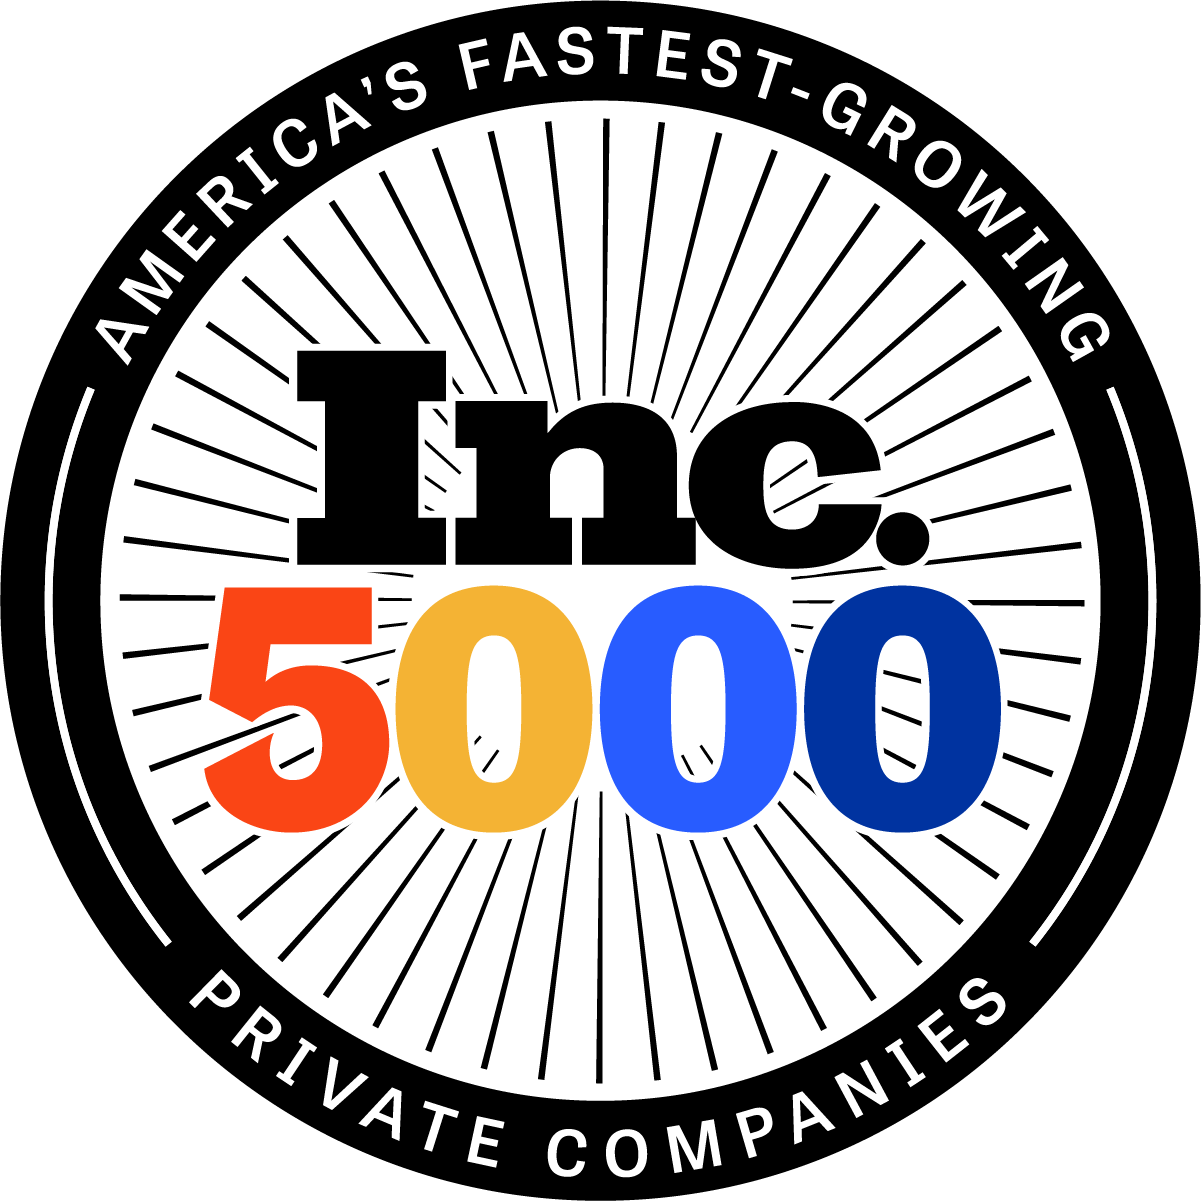 The logo of the Inc.5000 ranking which precision talent solutions is a part of.